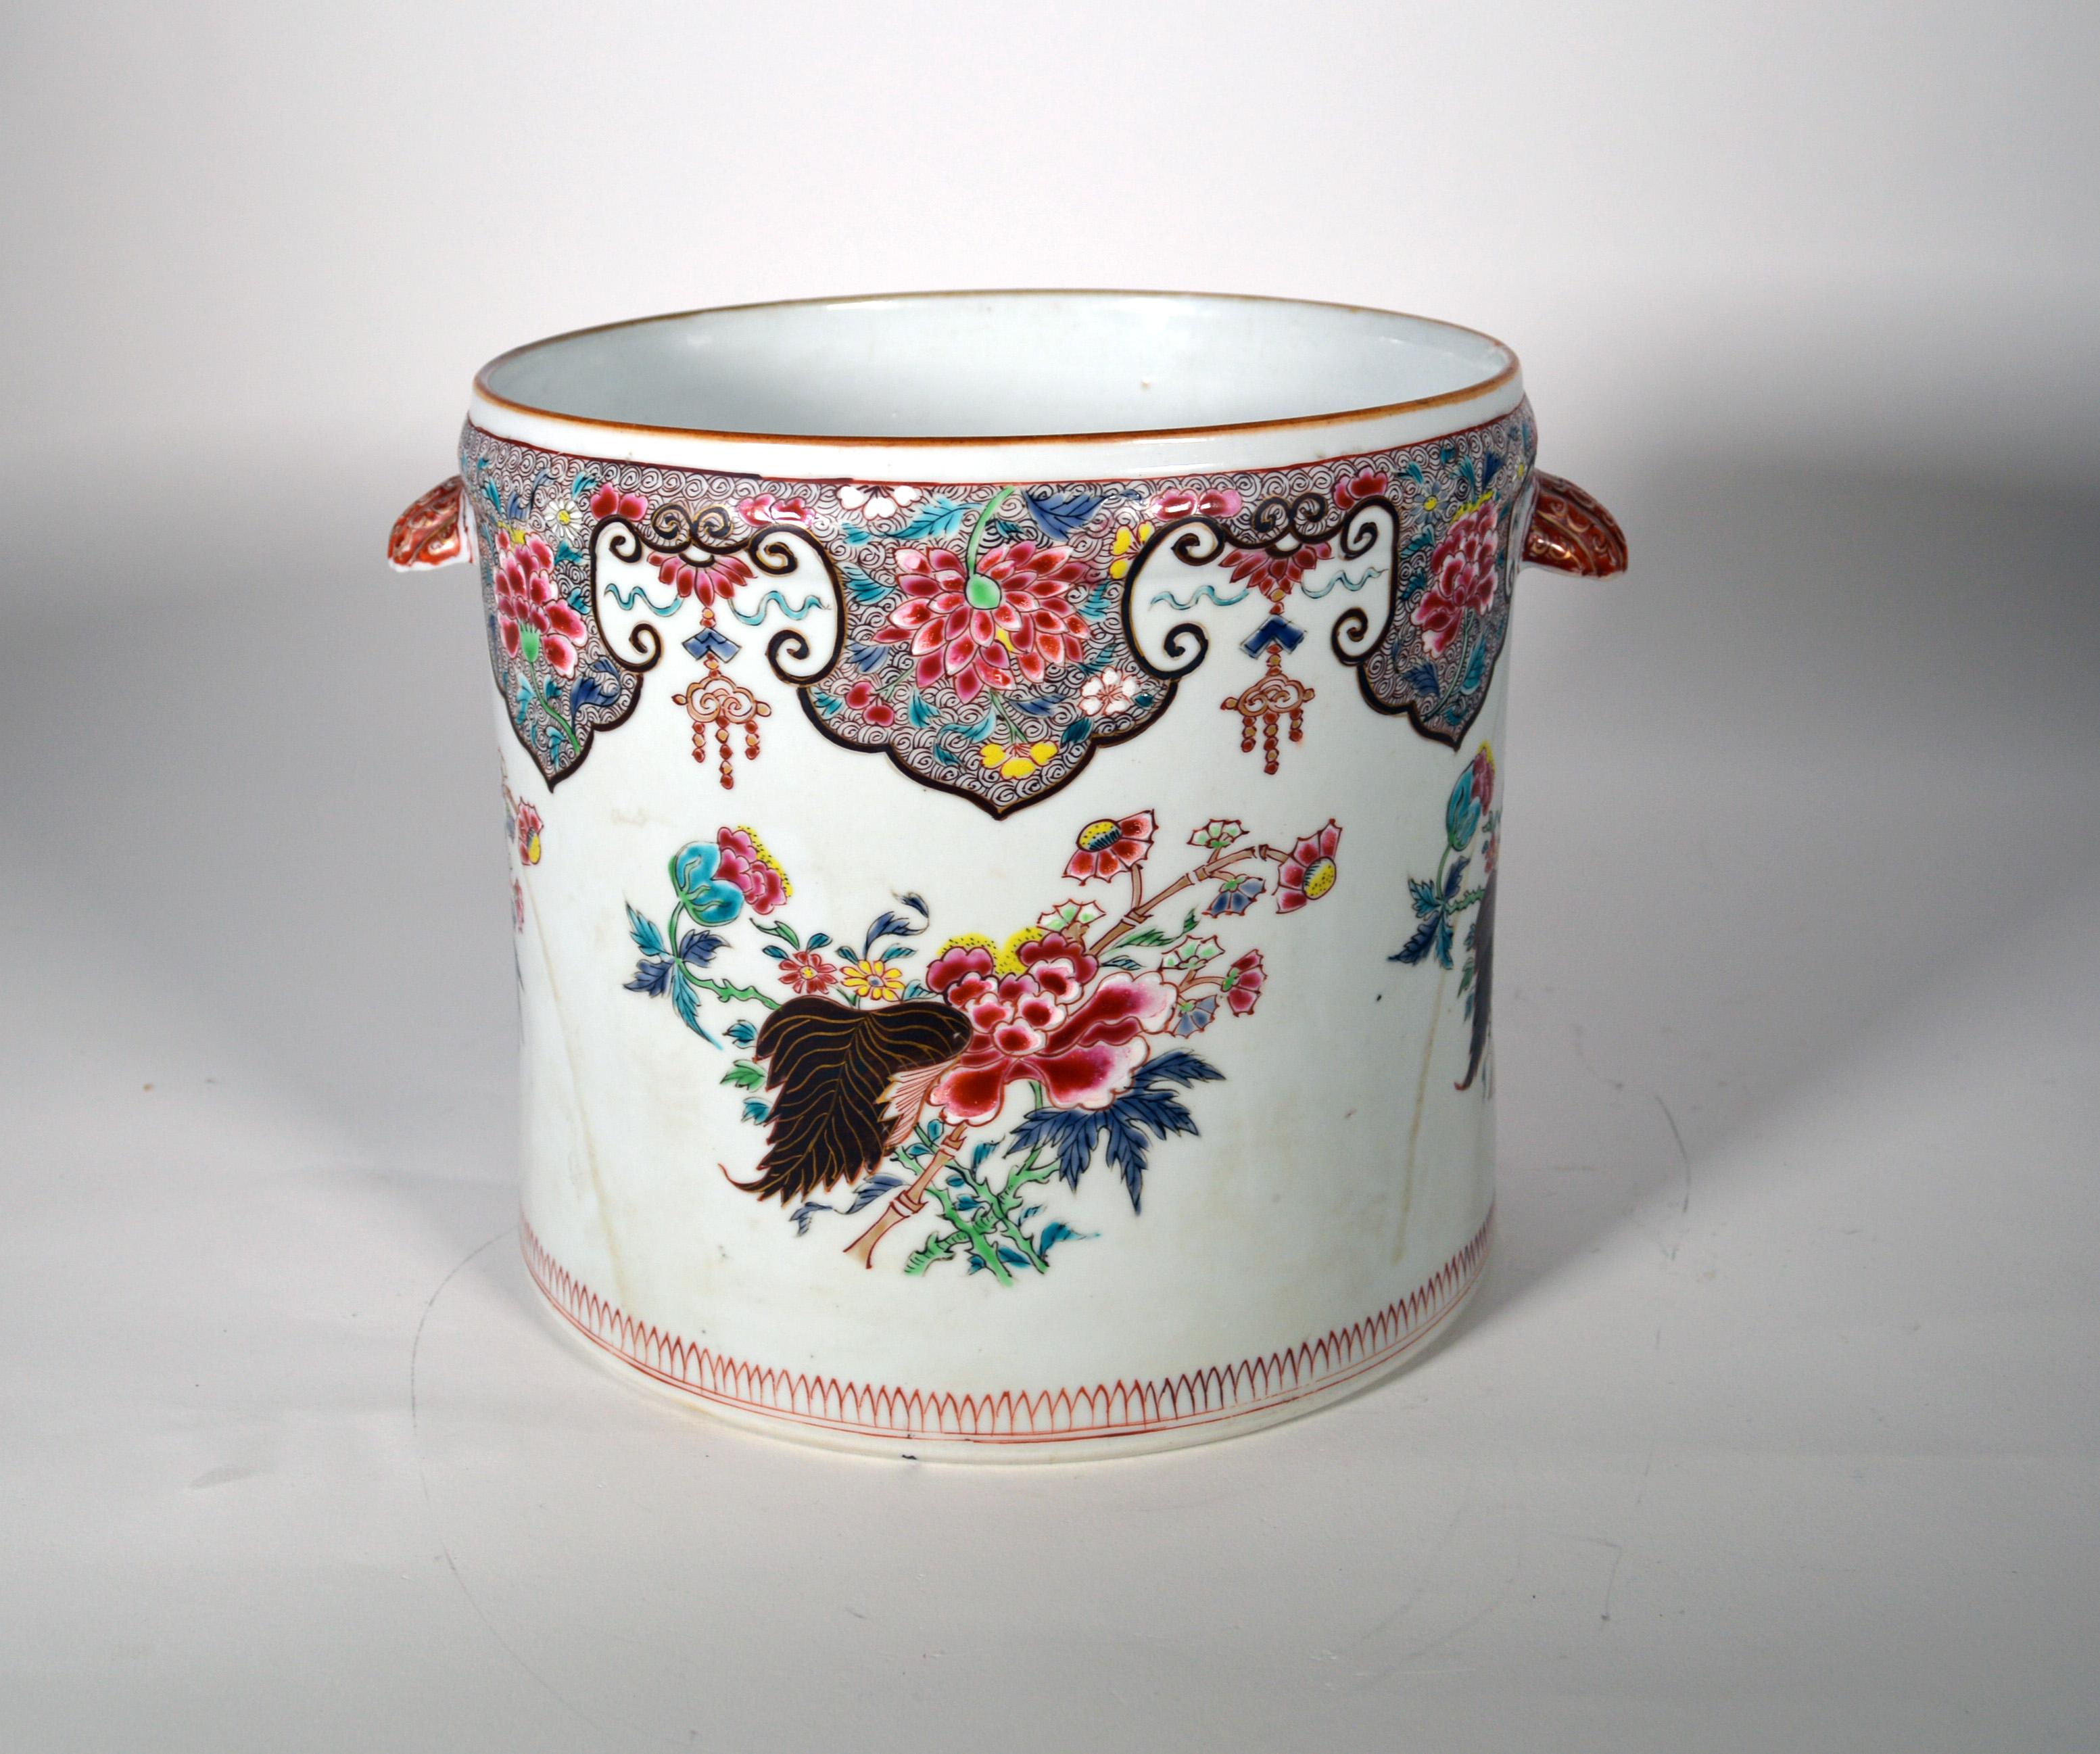 Chinese Export Porcelain Famille Rose Cachepot,
Circa 1750-60
  
The very large Chinese Export porcelain cachepot is of cylindrical form with an inverted shell handle to each side. There is a grouping of bamboo and peony plants to each side, and